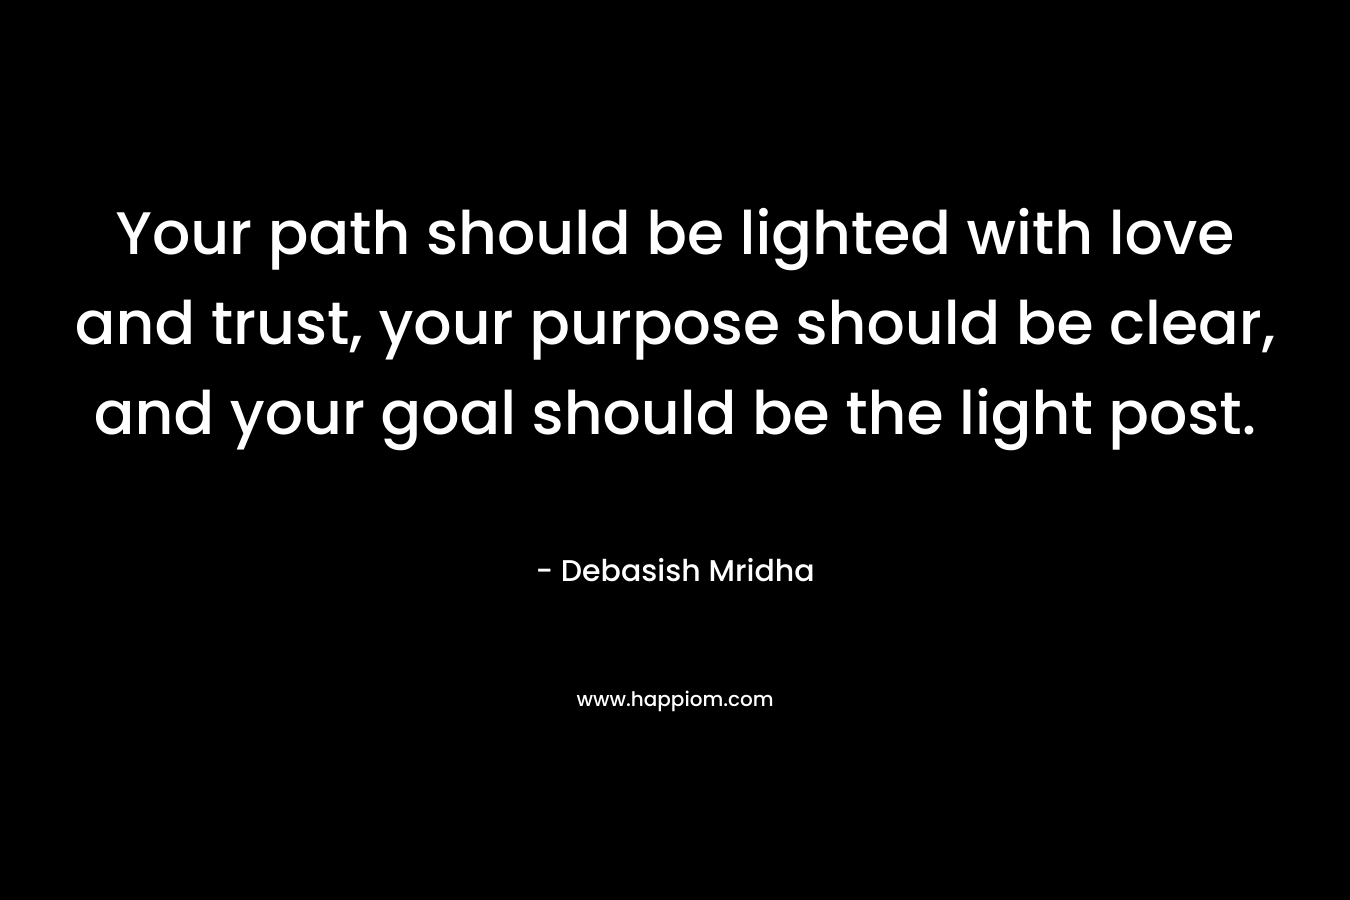 Your path should be lighted with love and trust, your purpose should be clear, and your goal should be the light post.